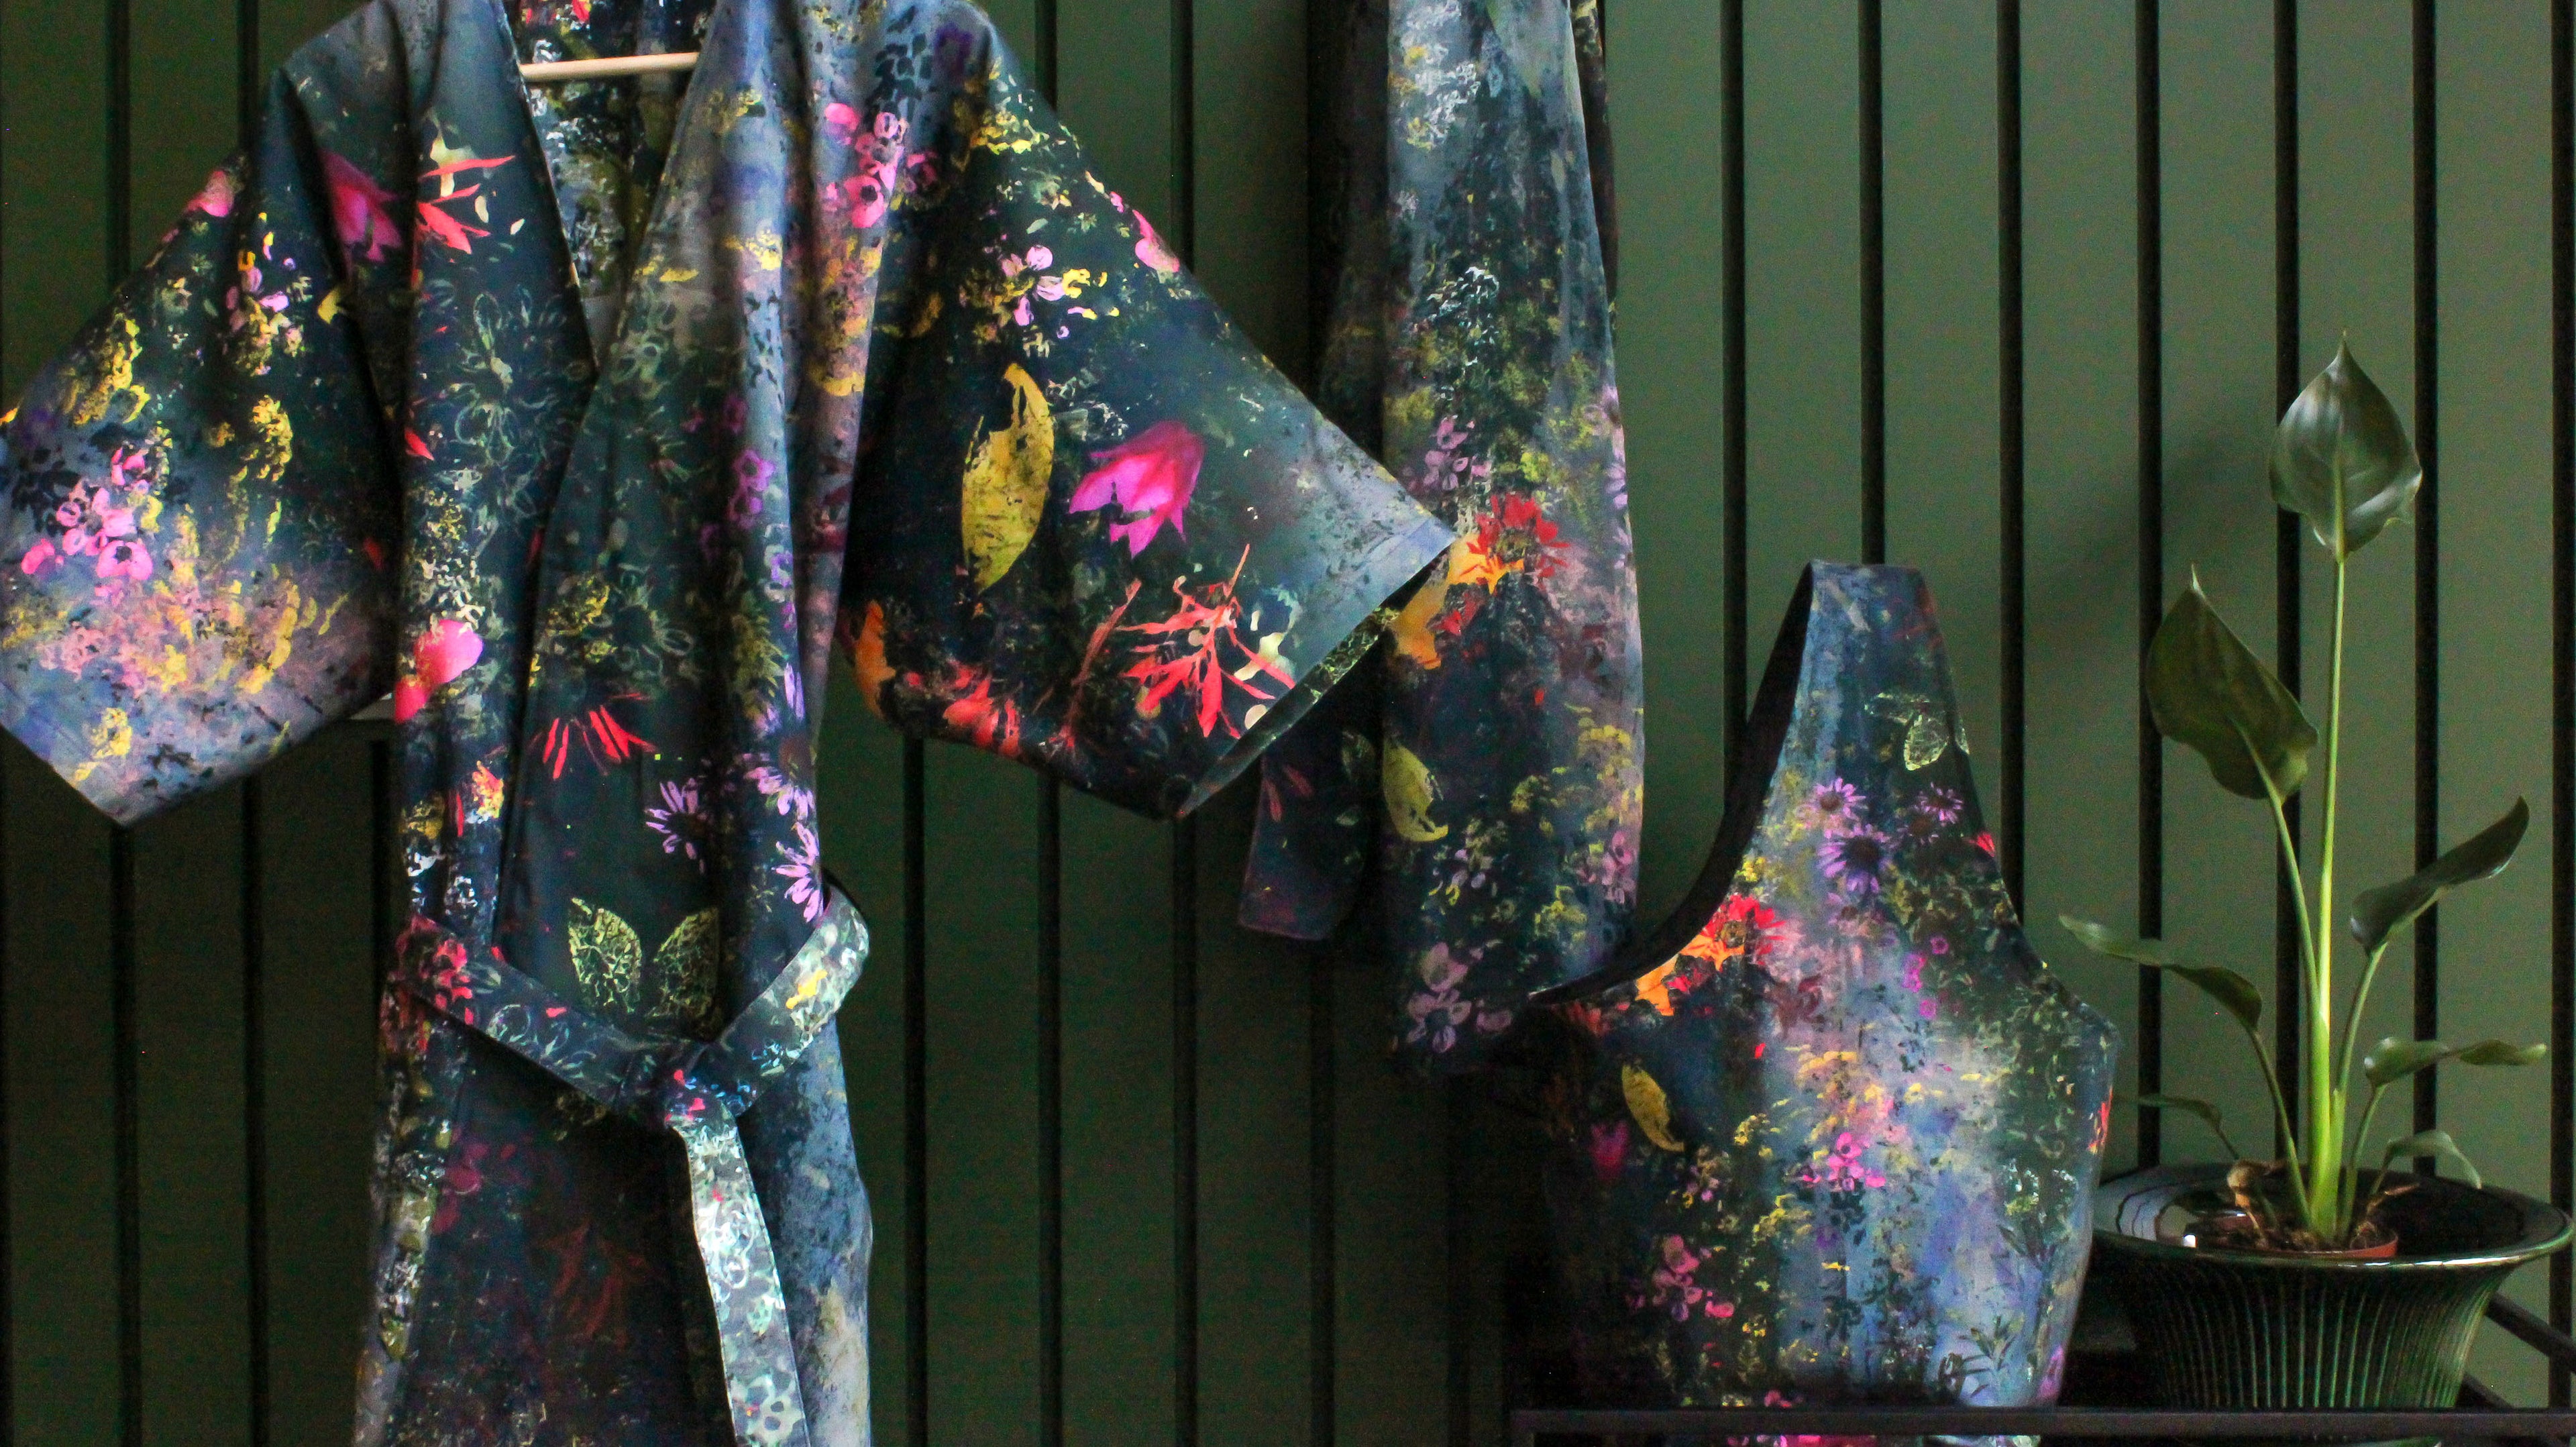 Floral printed Kimono, Silk Scarf and Cotton Bag. Part of the Rainfall Blooms Collection